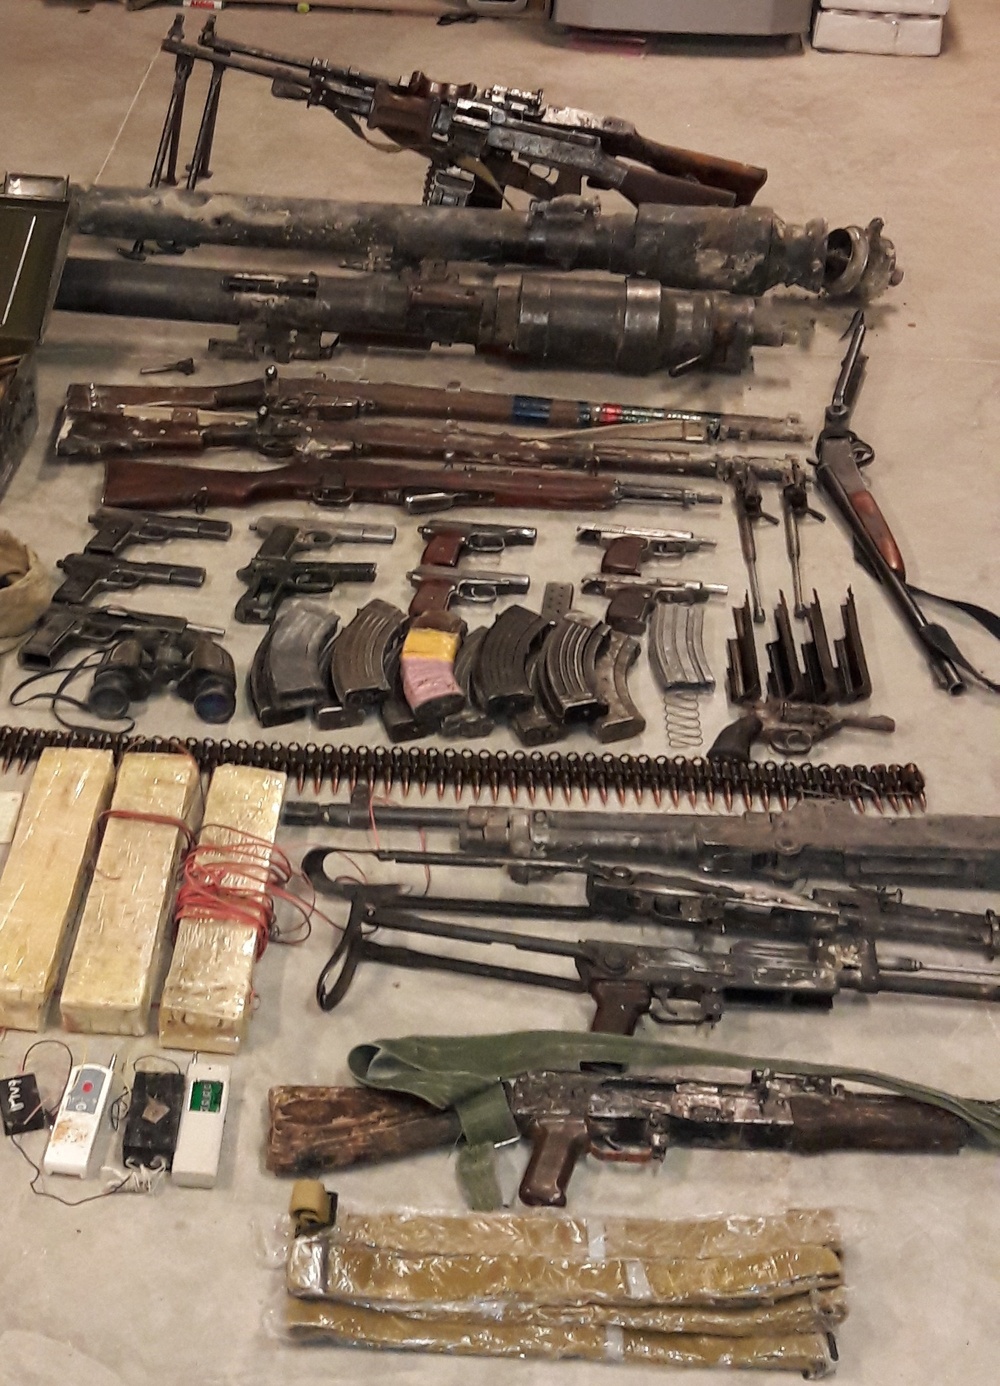 Commandos night raid surprises Taliban, captures weapons and drugs